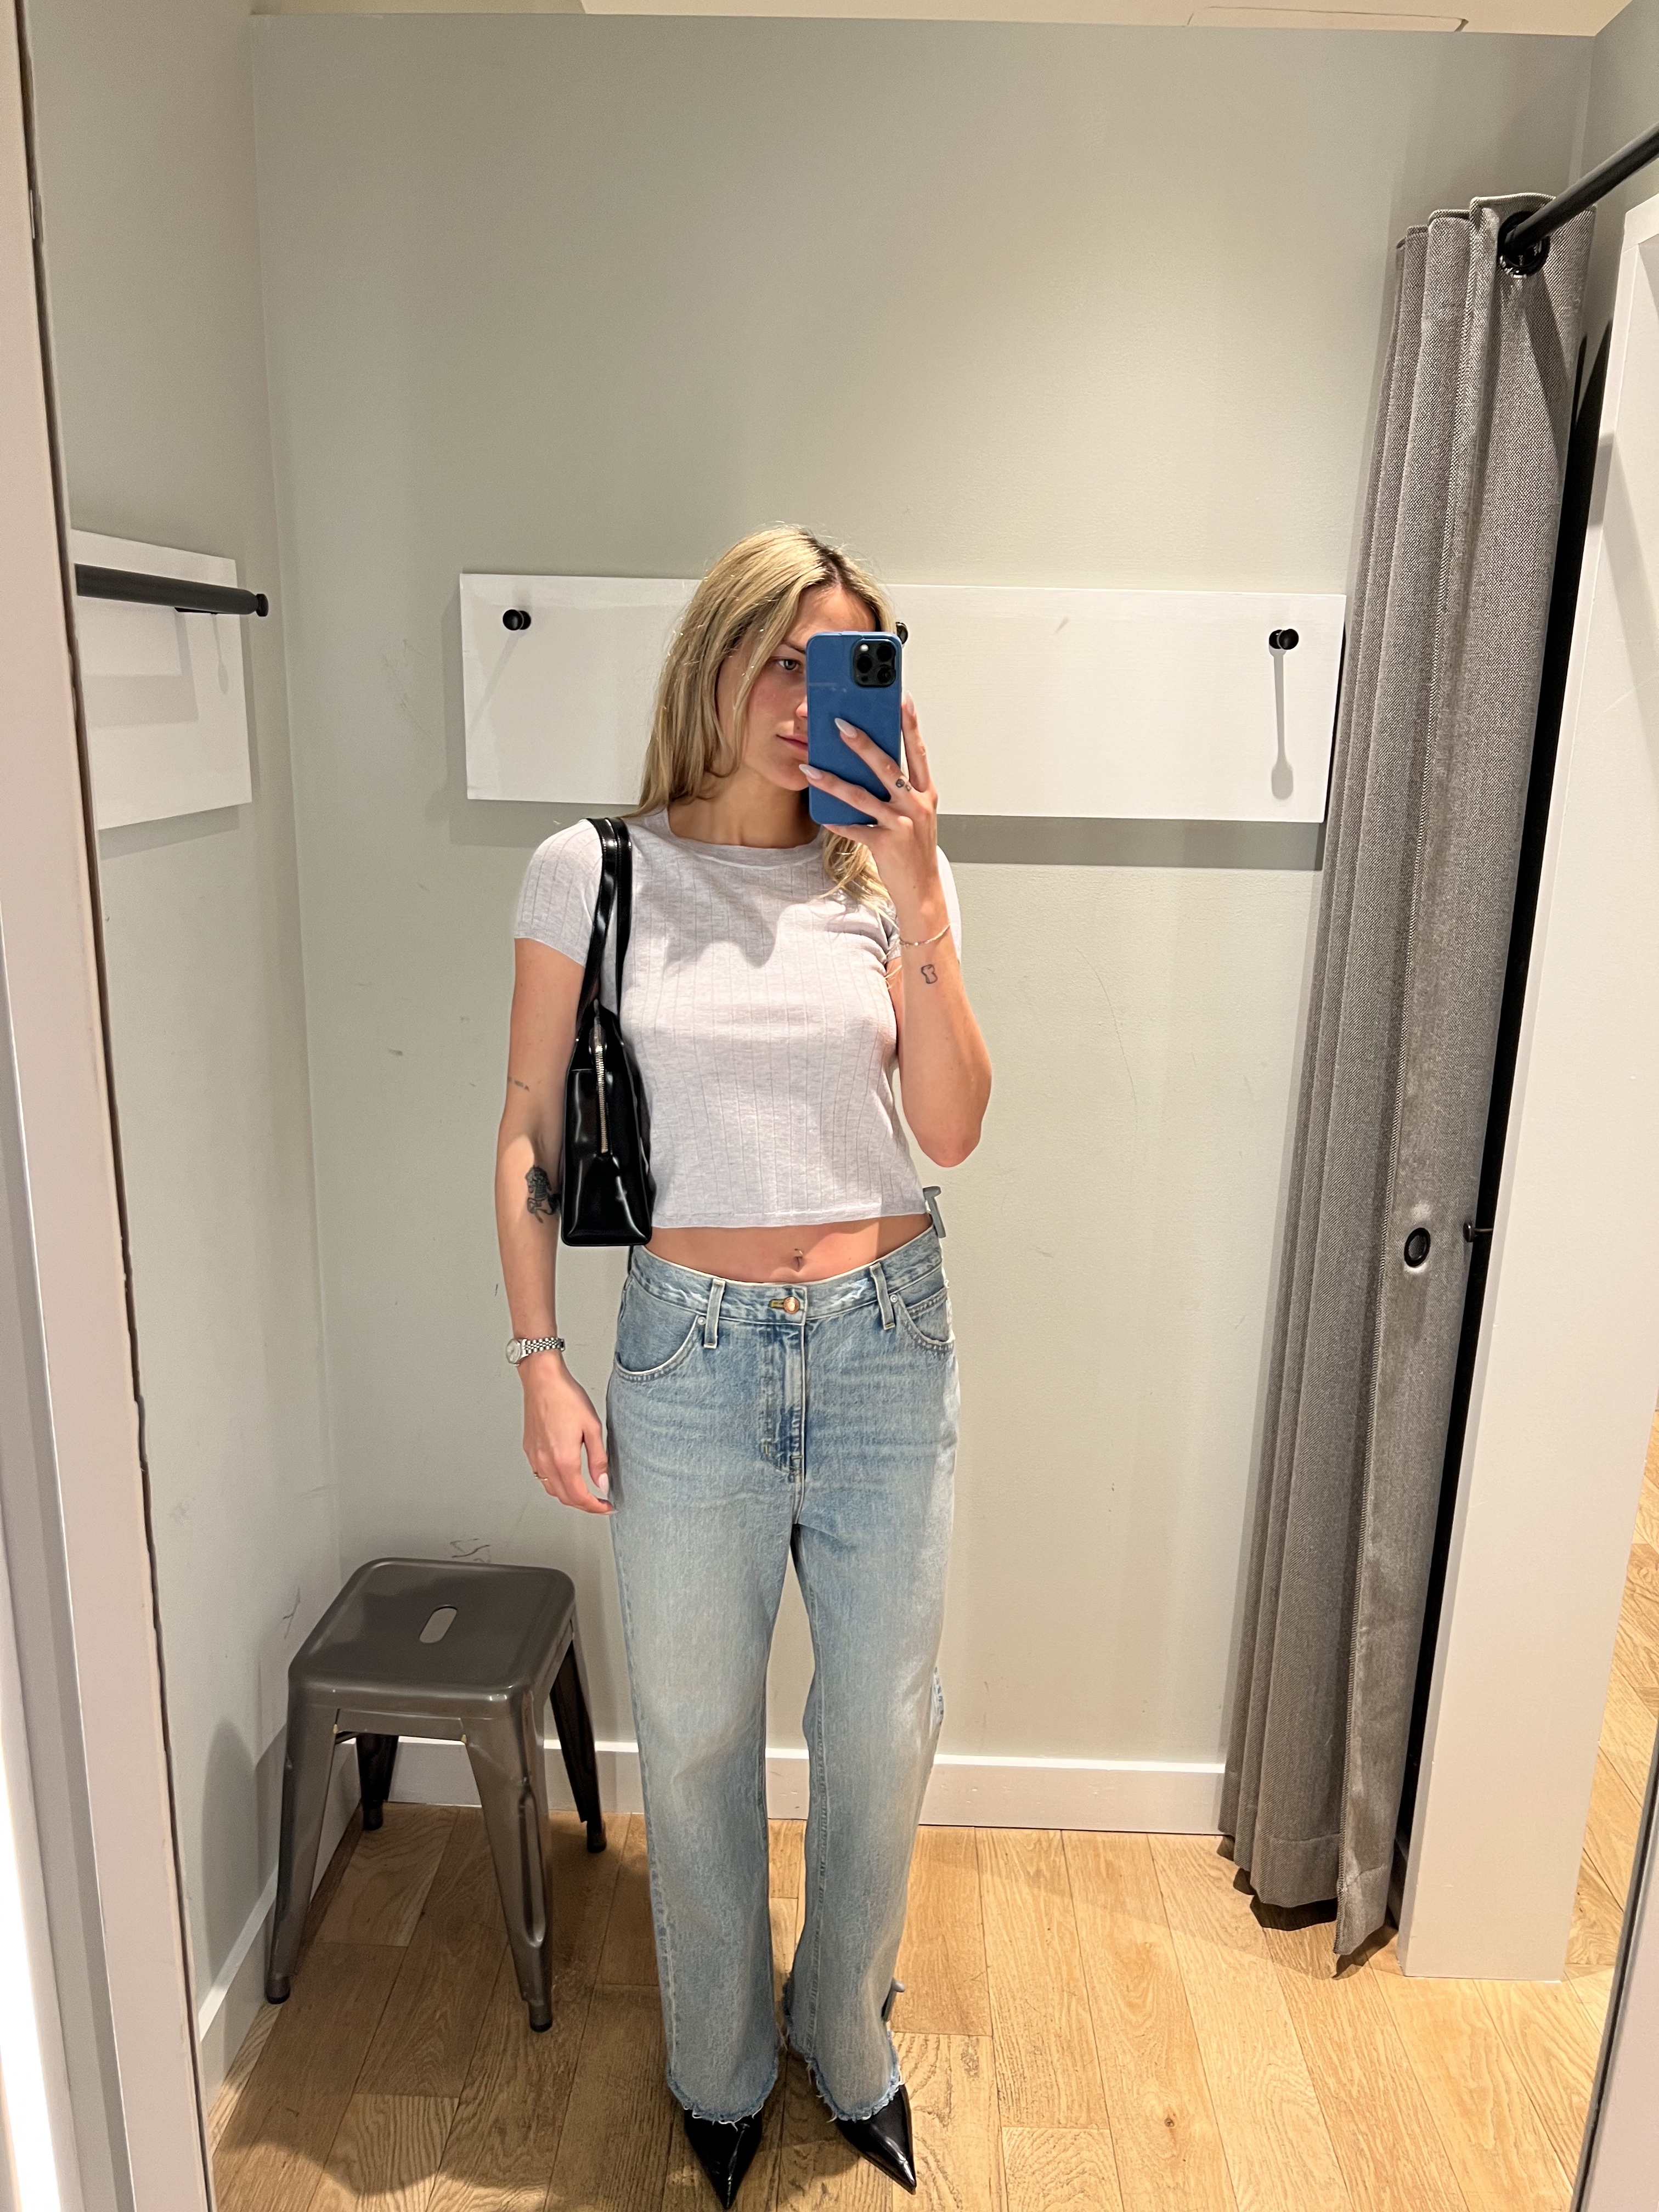 19 Gap, J.Crew, and Banana Republic Finds I Tried and Loved | Who What Wear